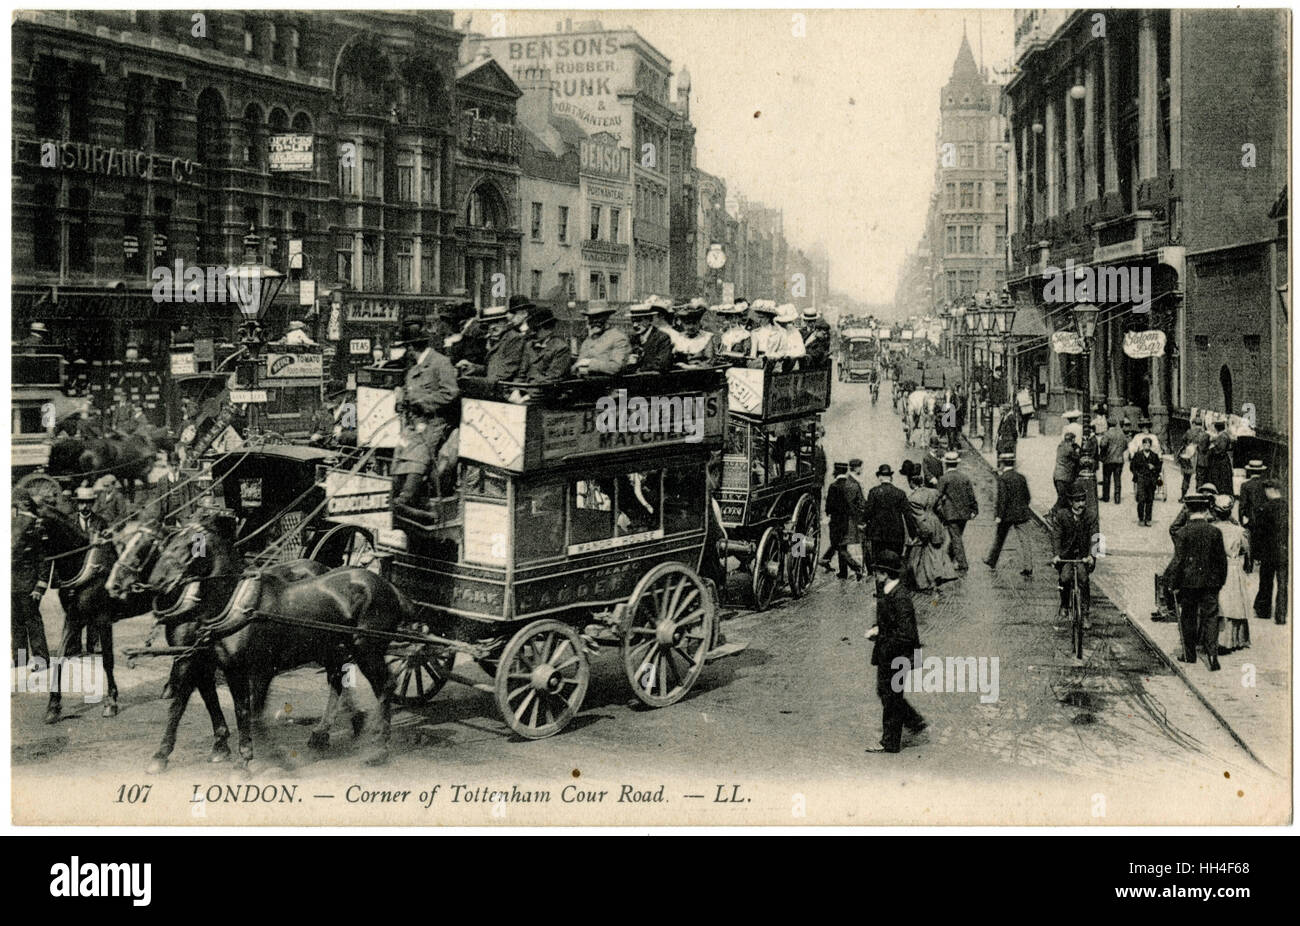 A fantastic postcard image showing traffic on the corner of Tottenham Court Road, London - a number of Horse Buses make the (undoubtedly rather bumpy) turn! Stock Photo